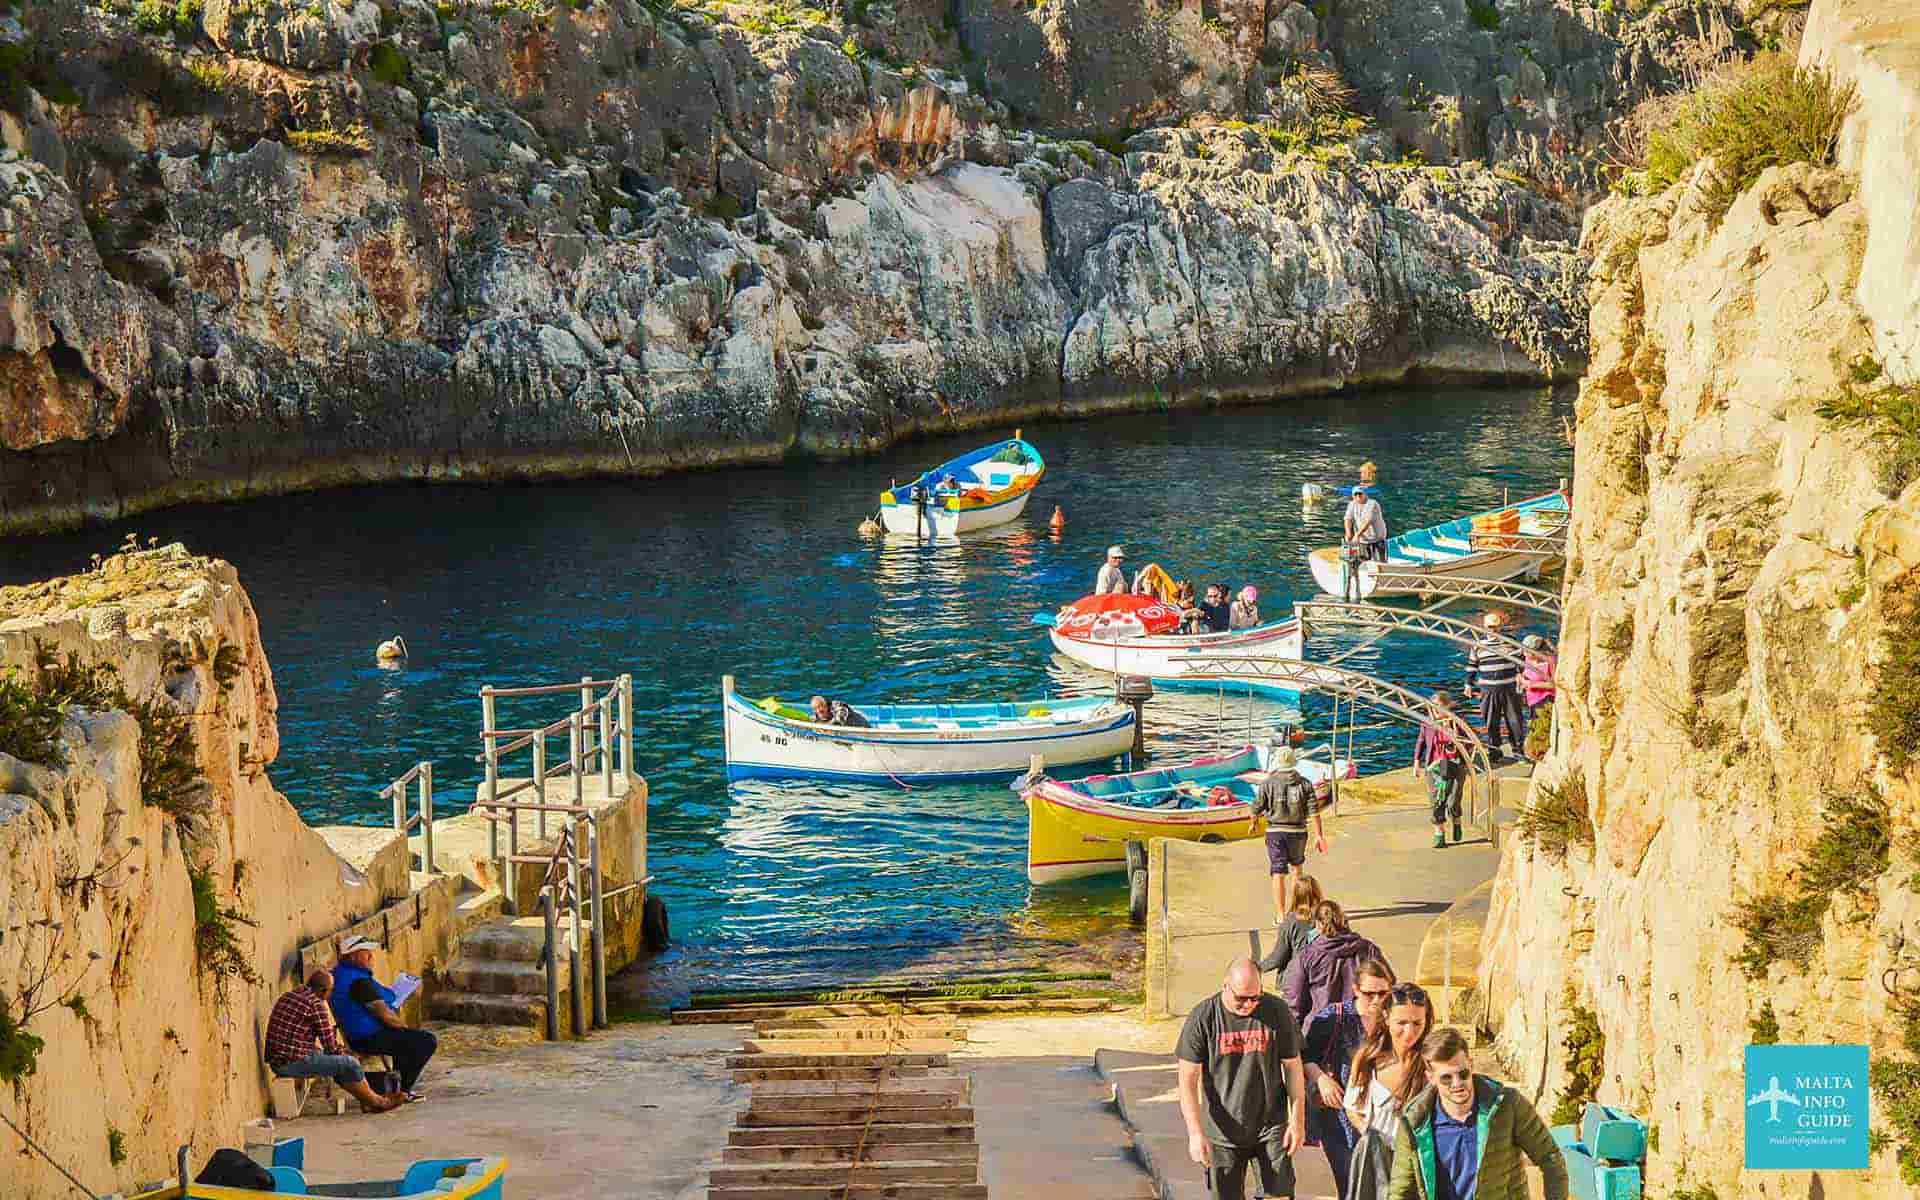 The boarding point for Blue Grotto Malta is one of the activities in Malta.